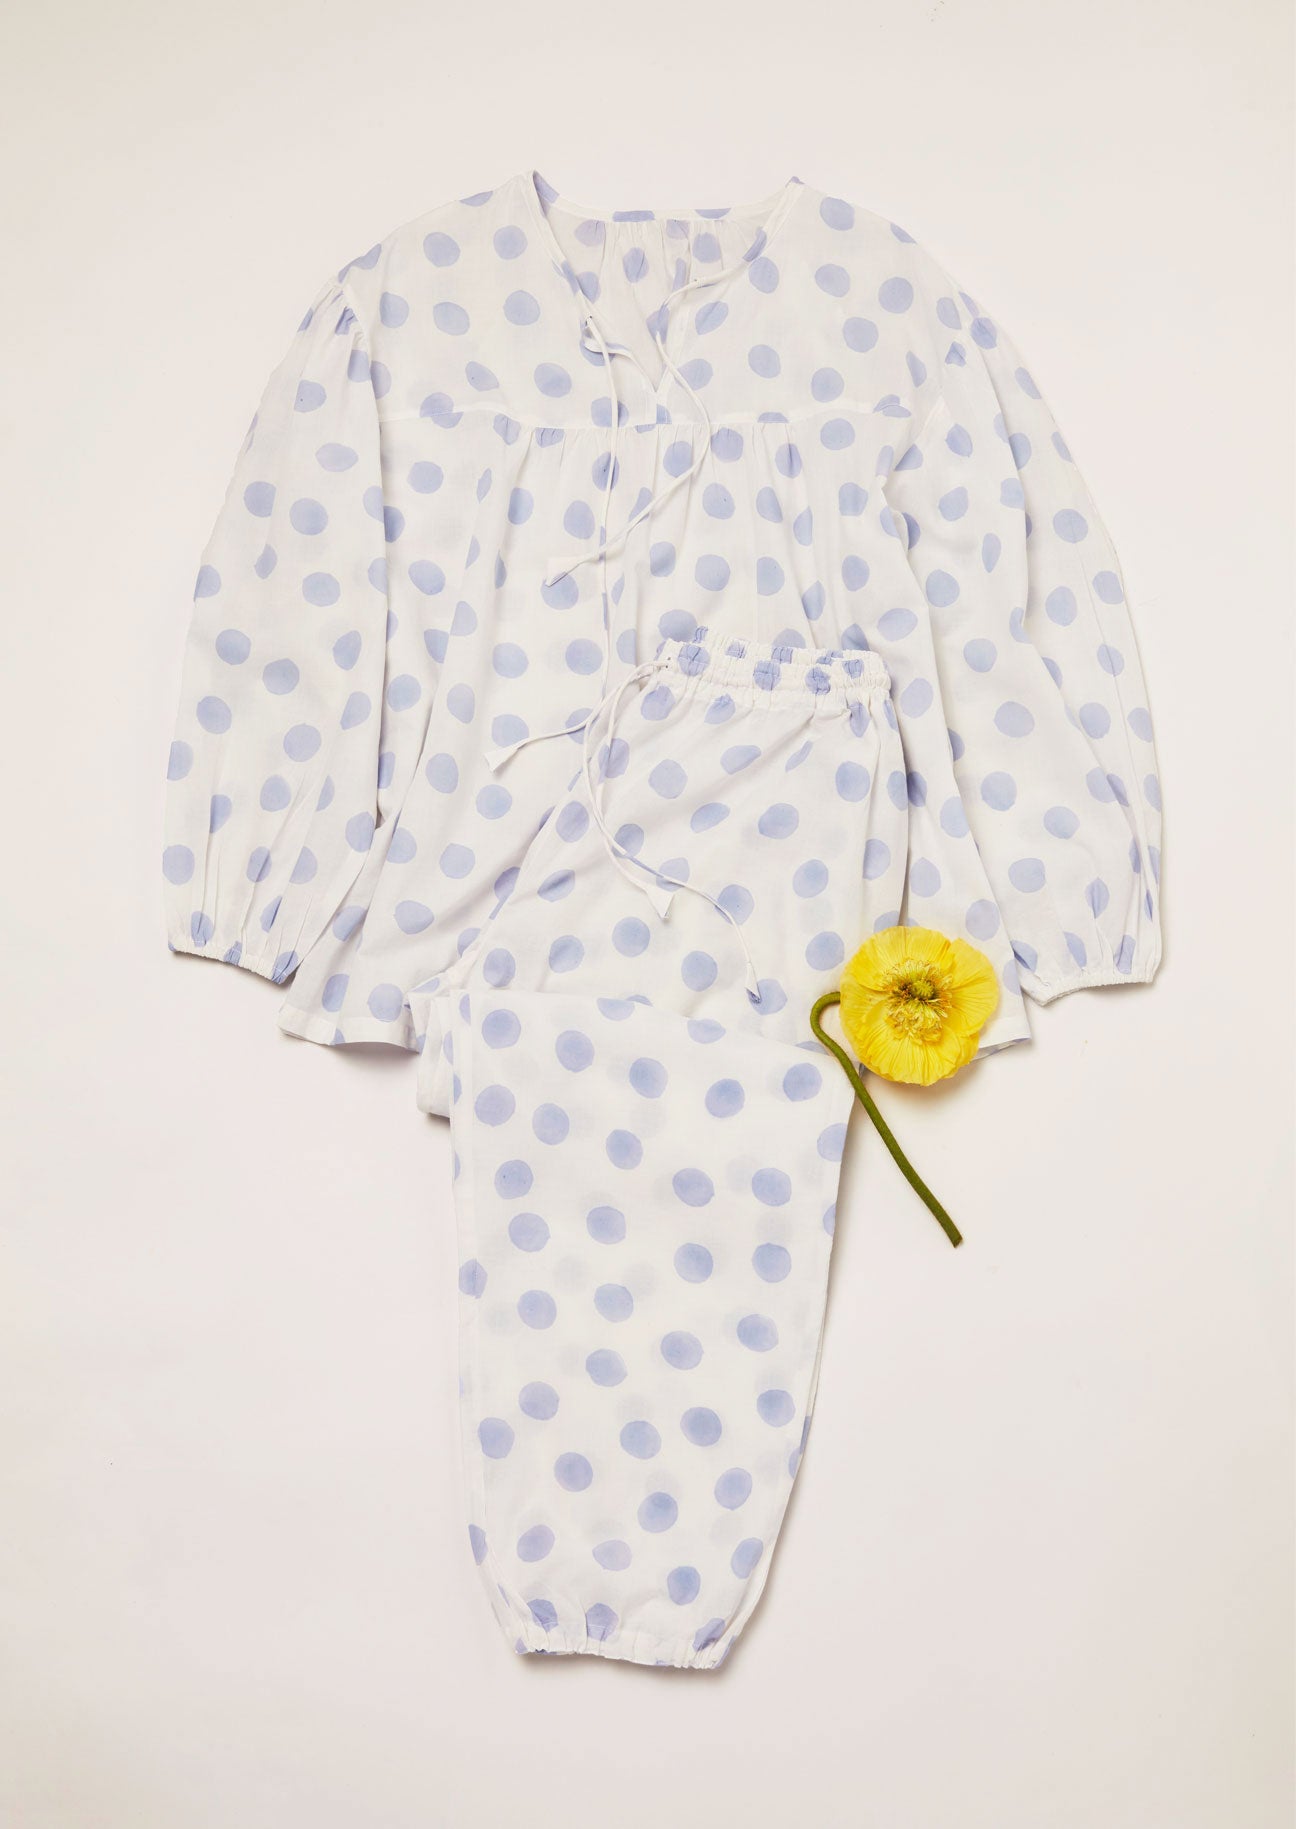 Pyjama set in pale blue dot block printed pnto white cototn voile with yellow poppy decoration.